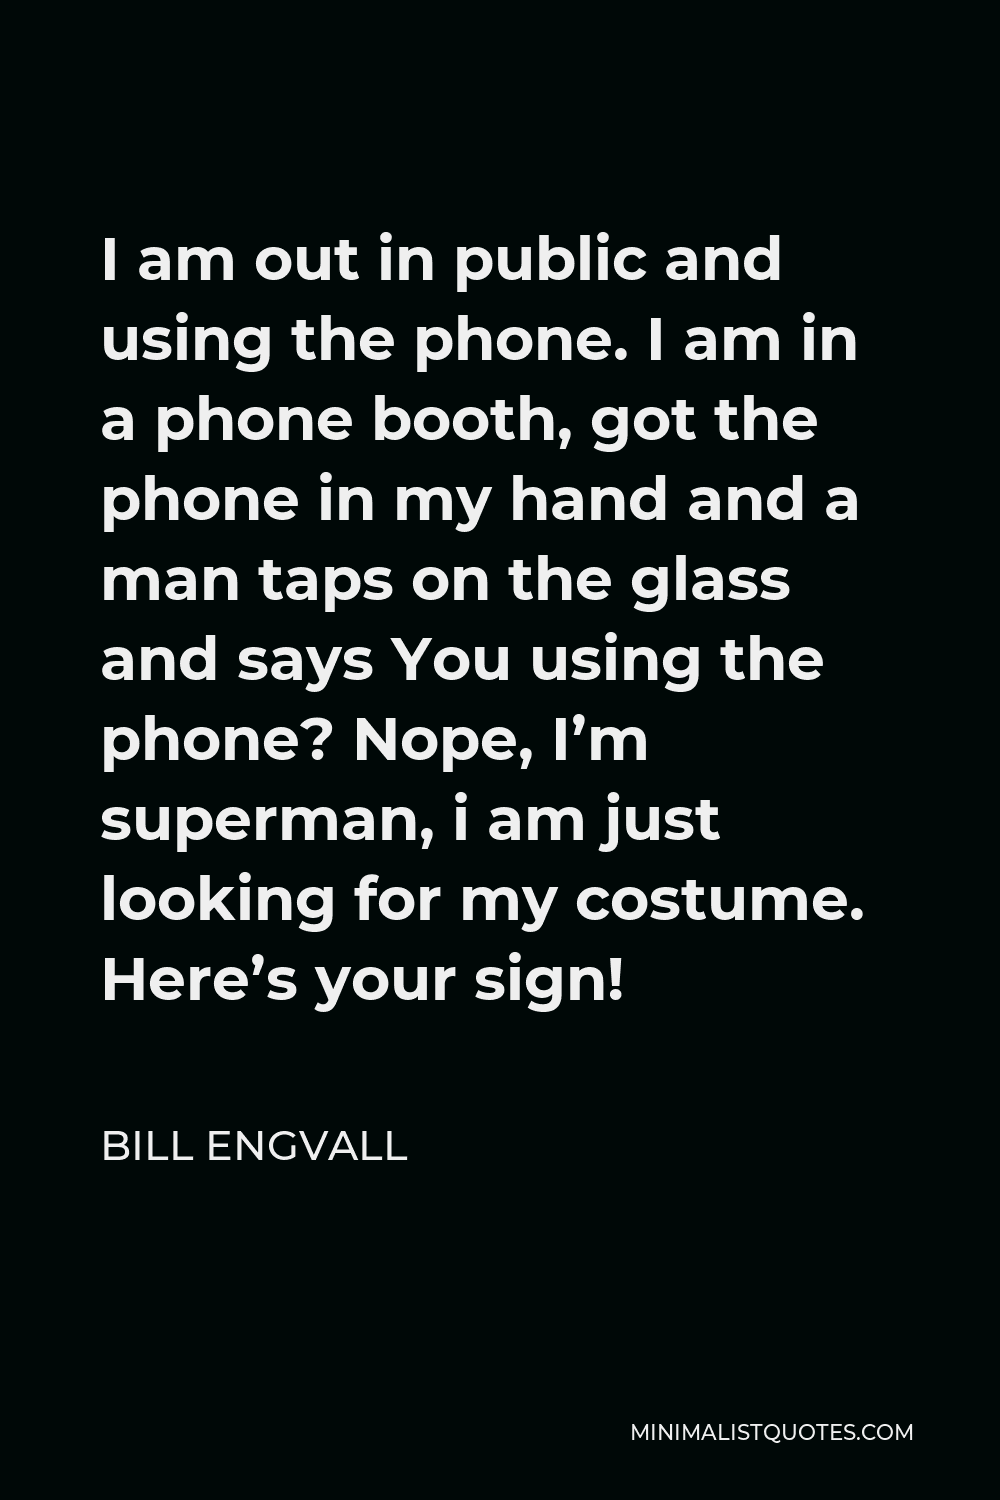 Bill Engvall Quote - I am out in public and using the phone. I am in a phone booth, got the phone in my hand and a man taps on the glass and says You using the phone? Nope, I’m superman, i am just looking for my costume. Here’s your sign!